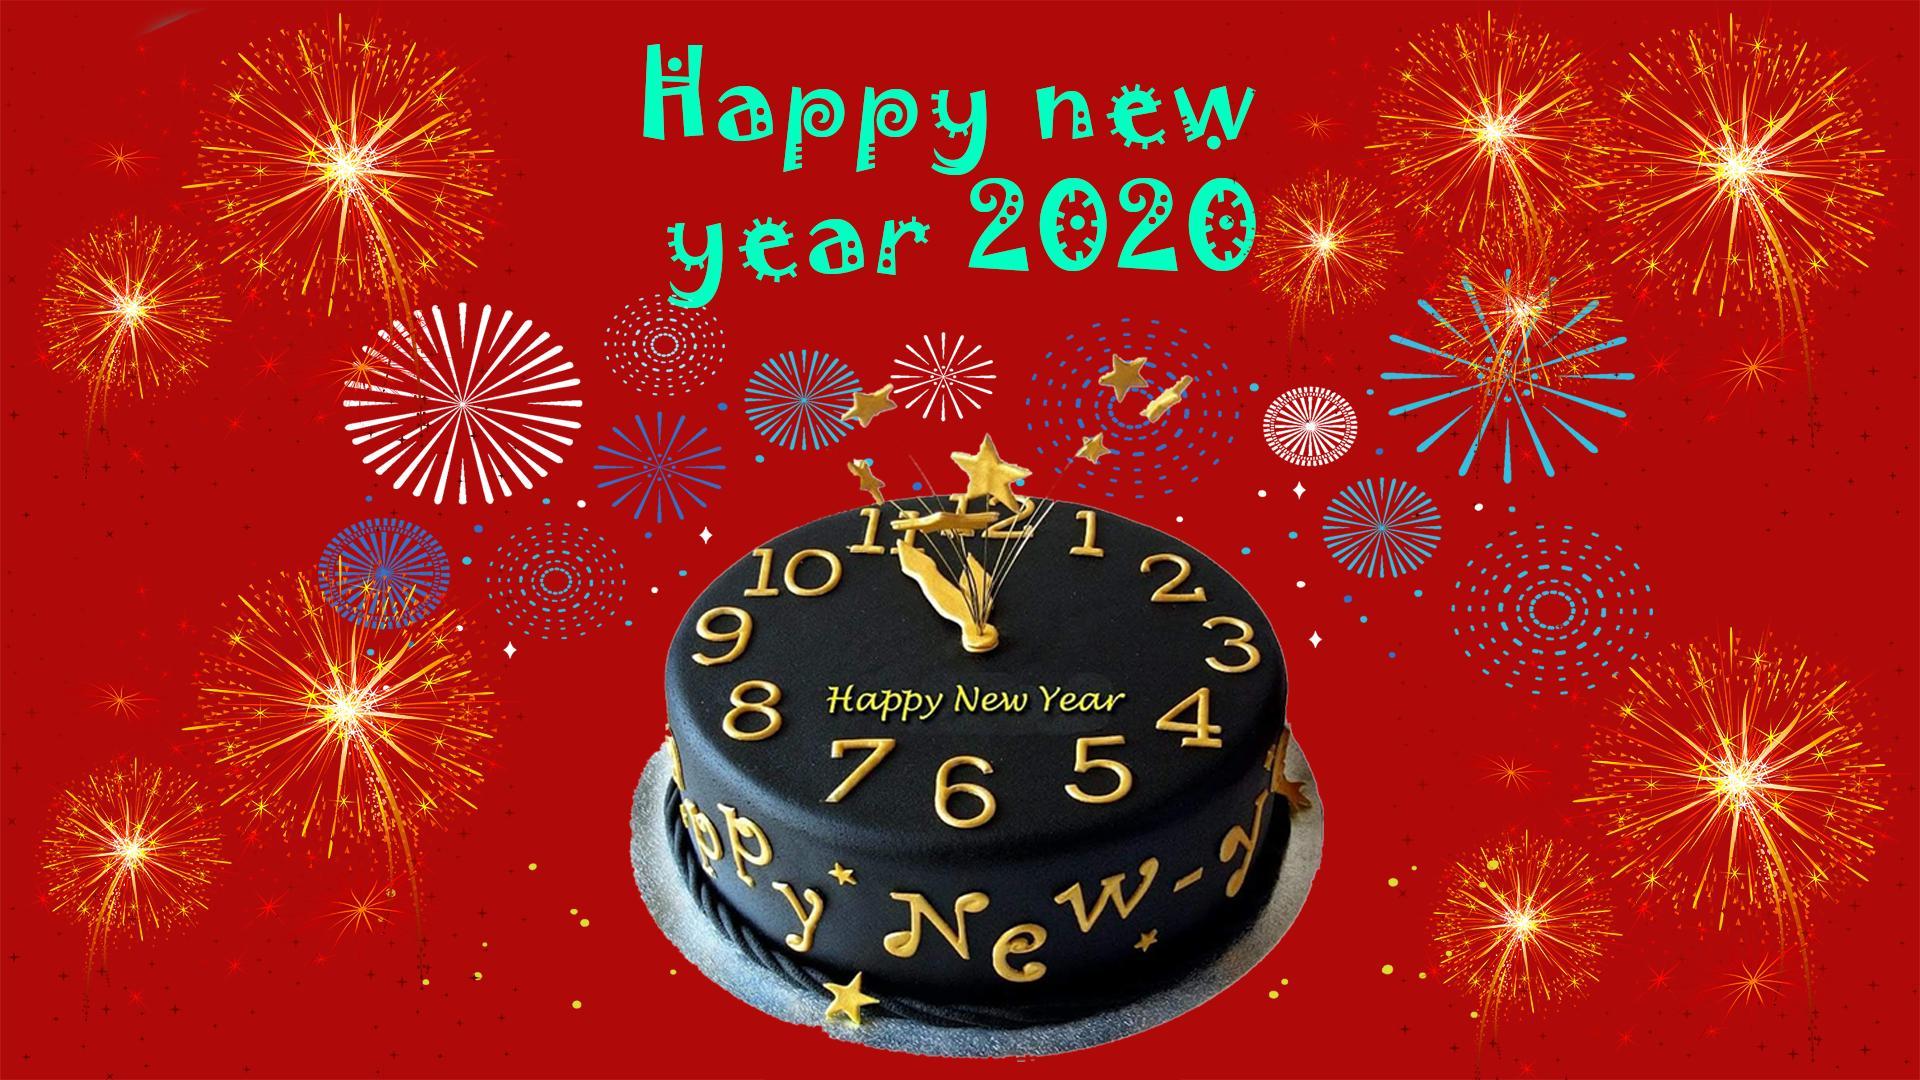 Happy new year 2020 banner HD background image